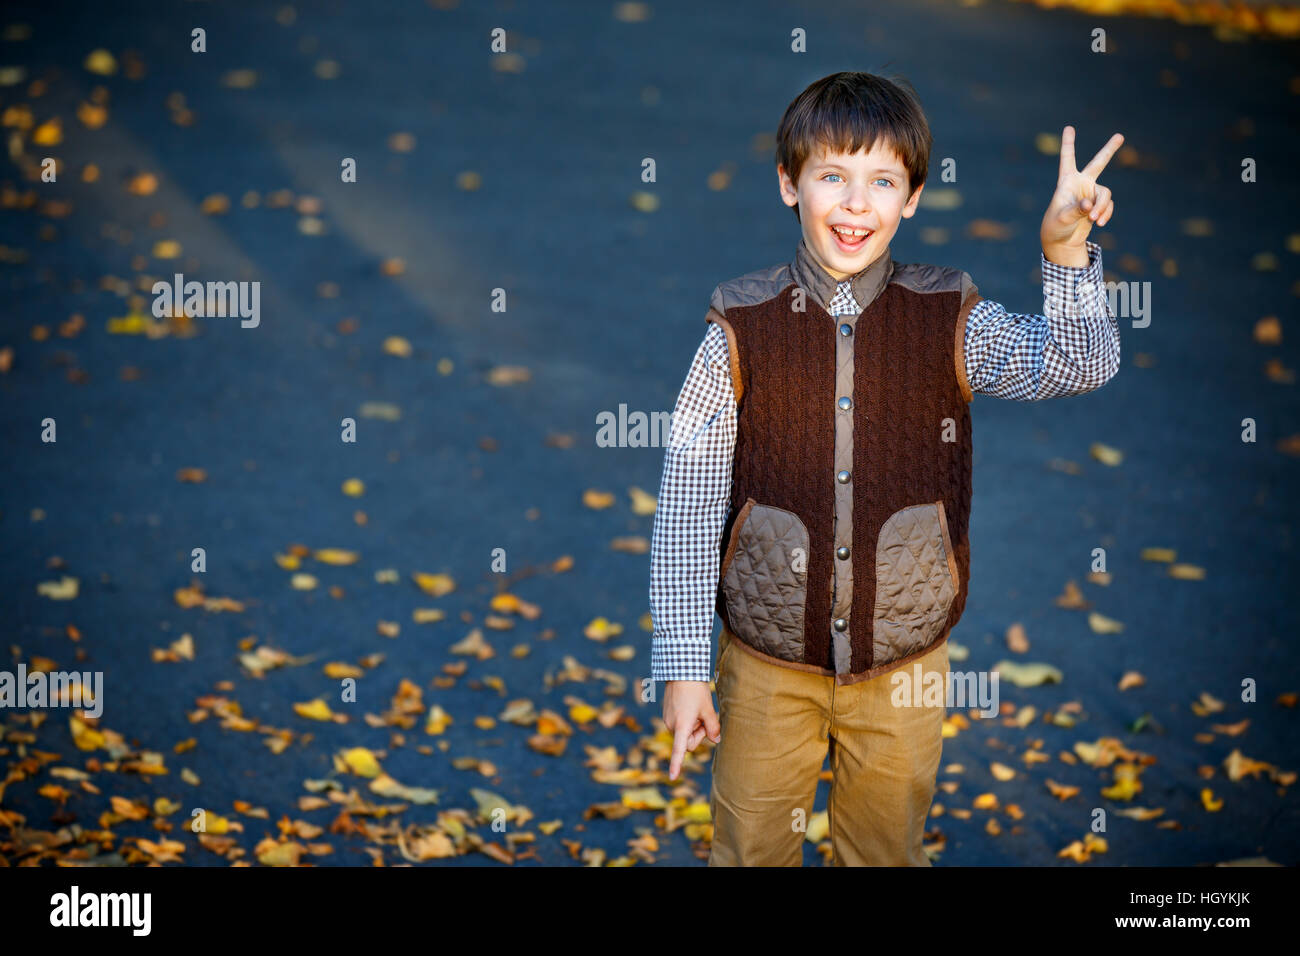 Admiring little boy laughing outdoors Stock Photo